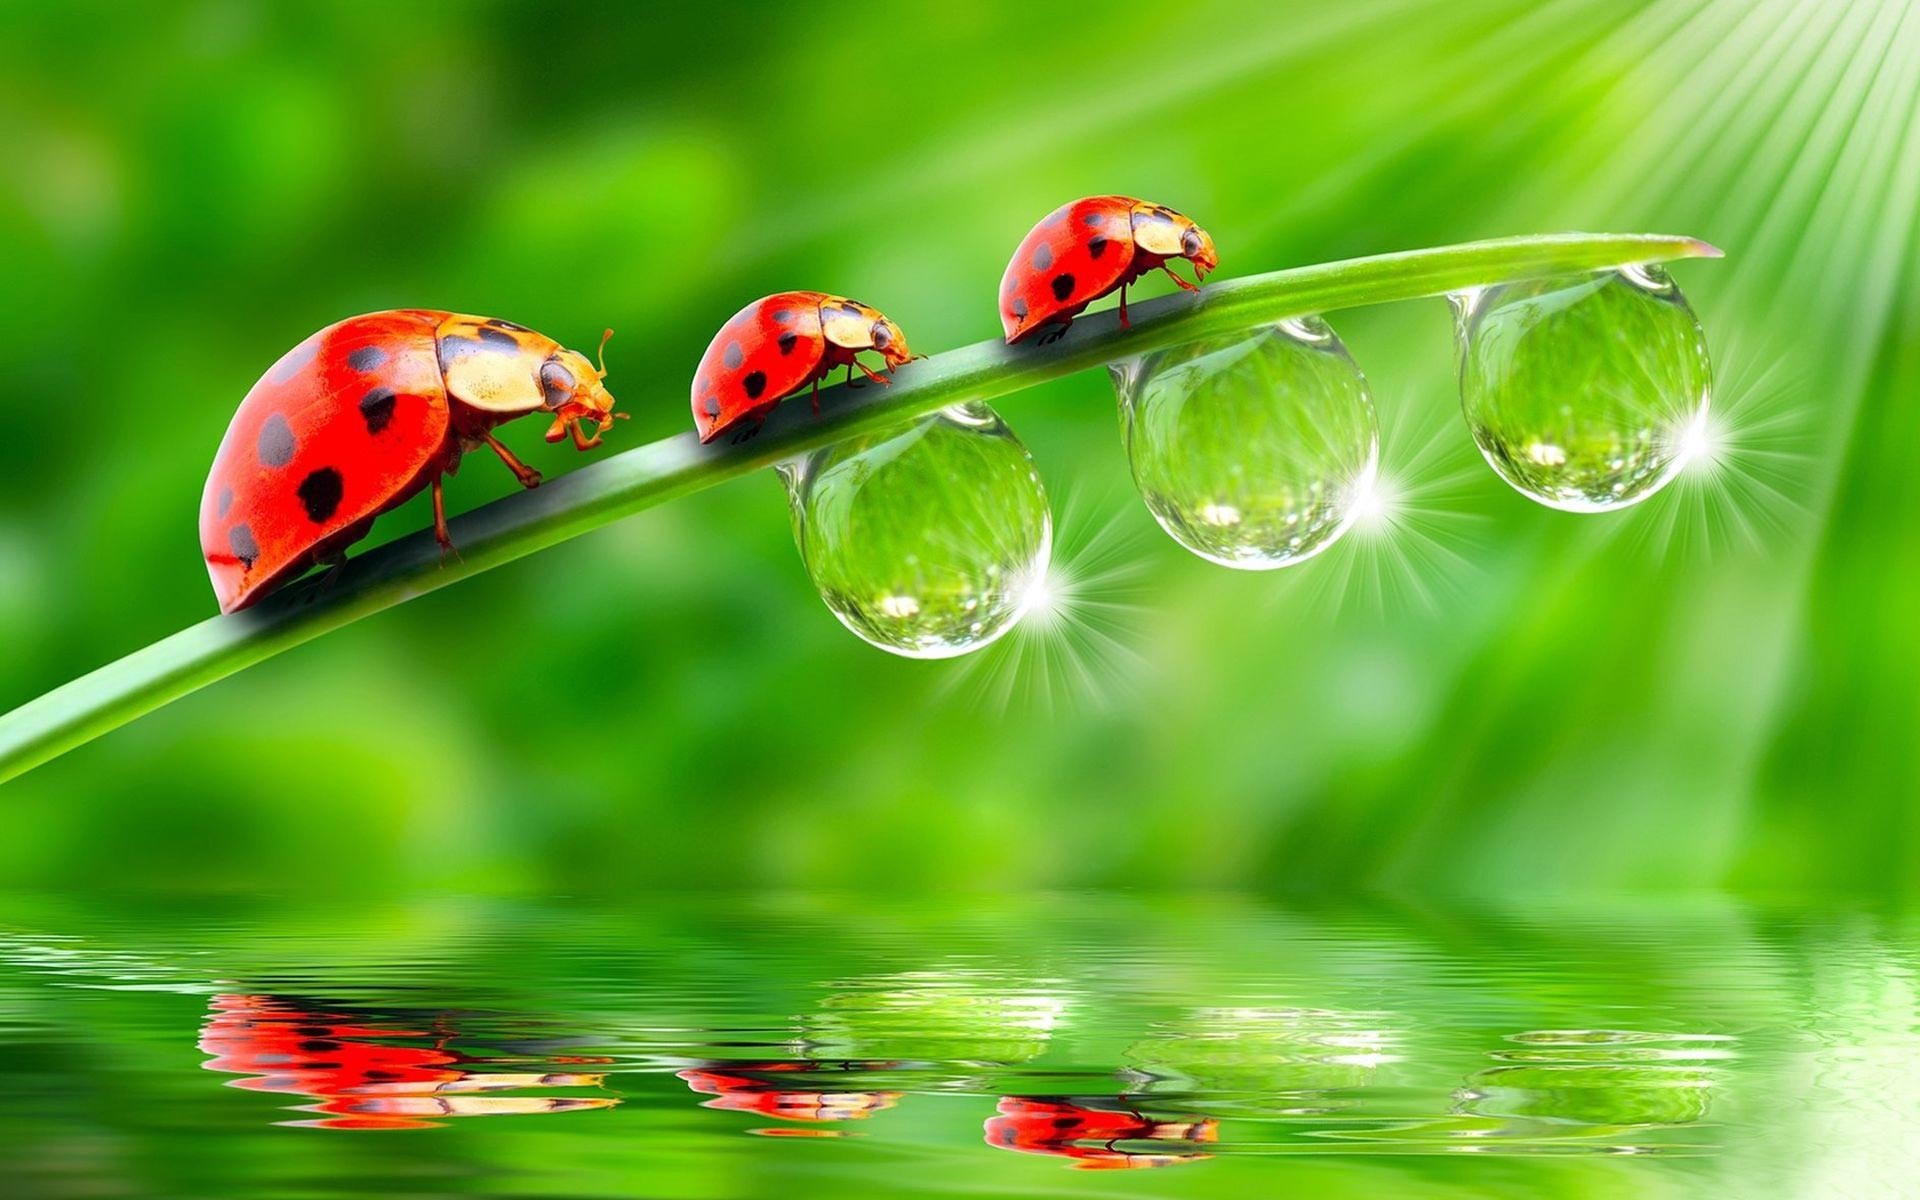 Cute Ladybug Wallpaper High Quality Resolution for Background